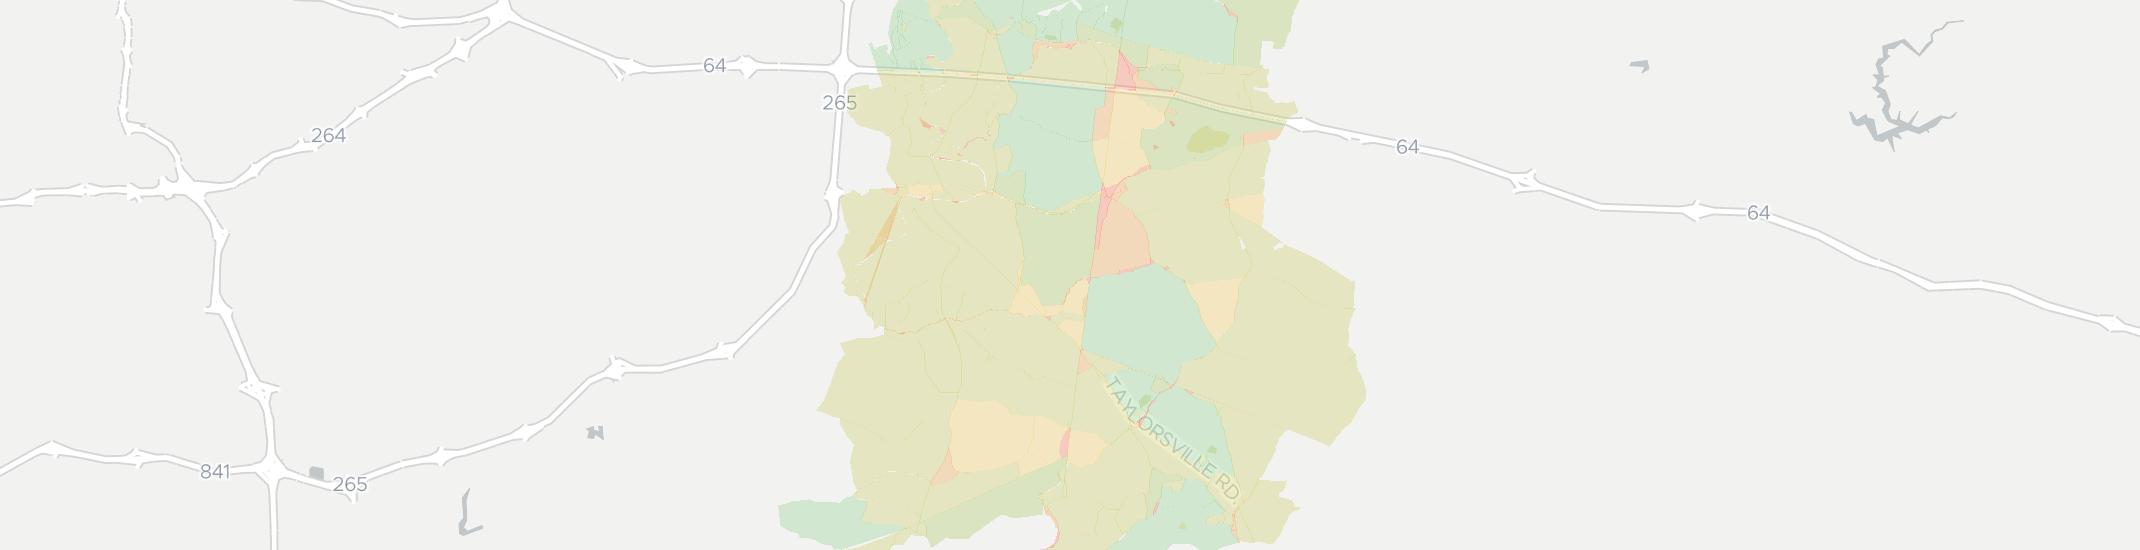 Fisherville Internet Competition Map. Click for interactive map.